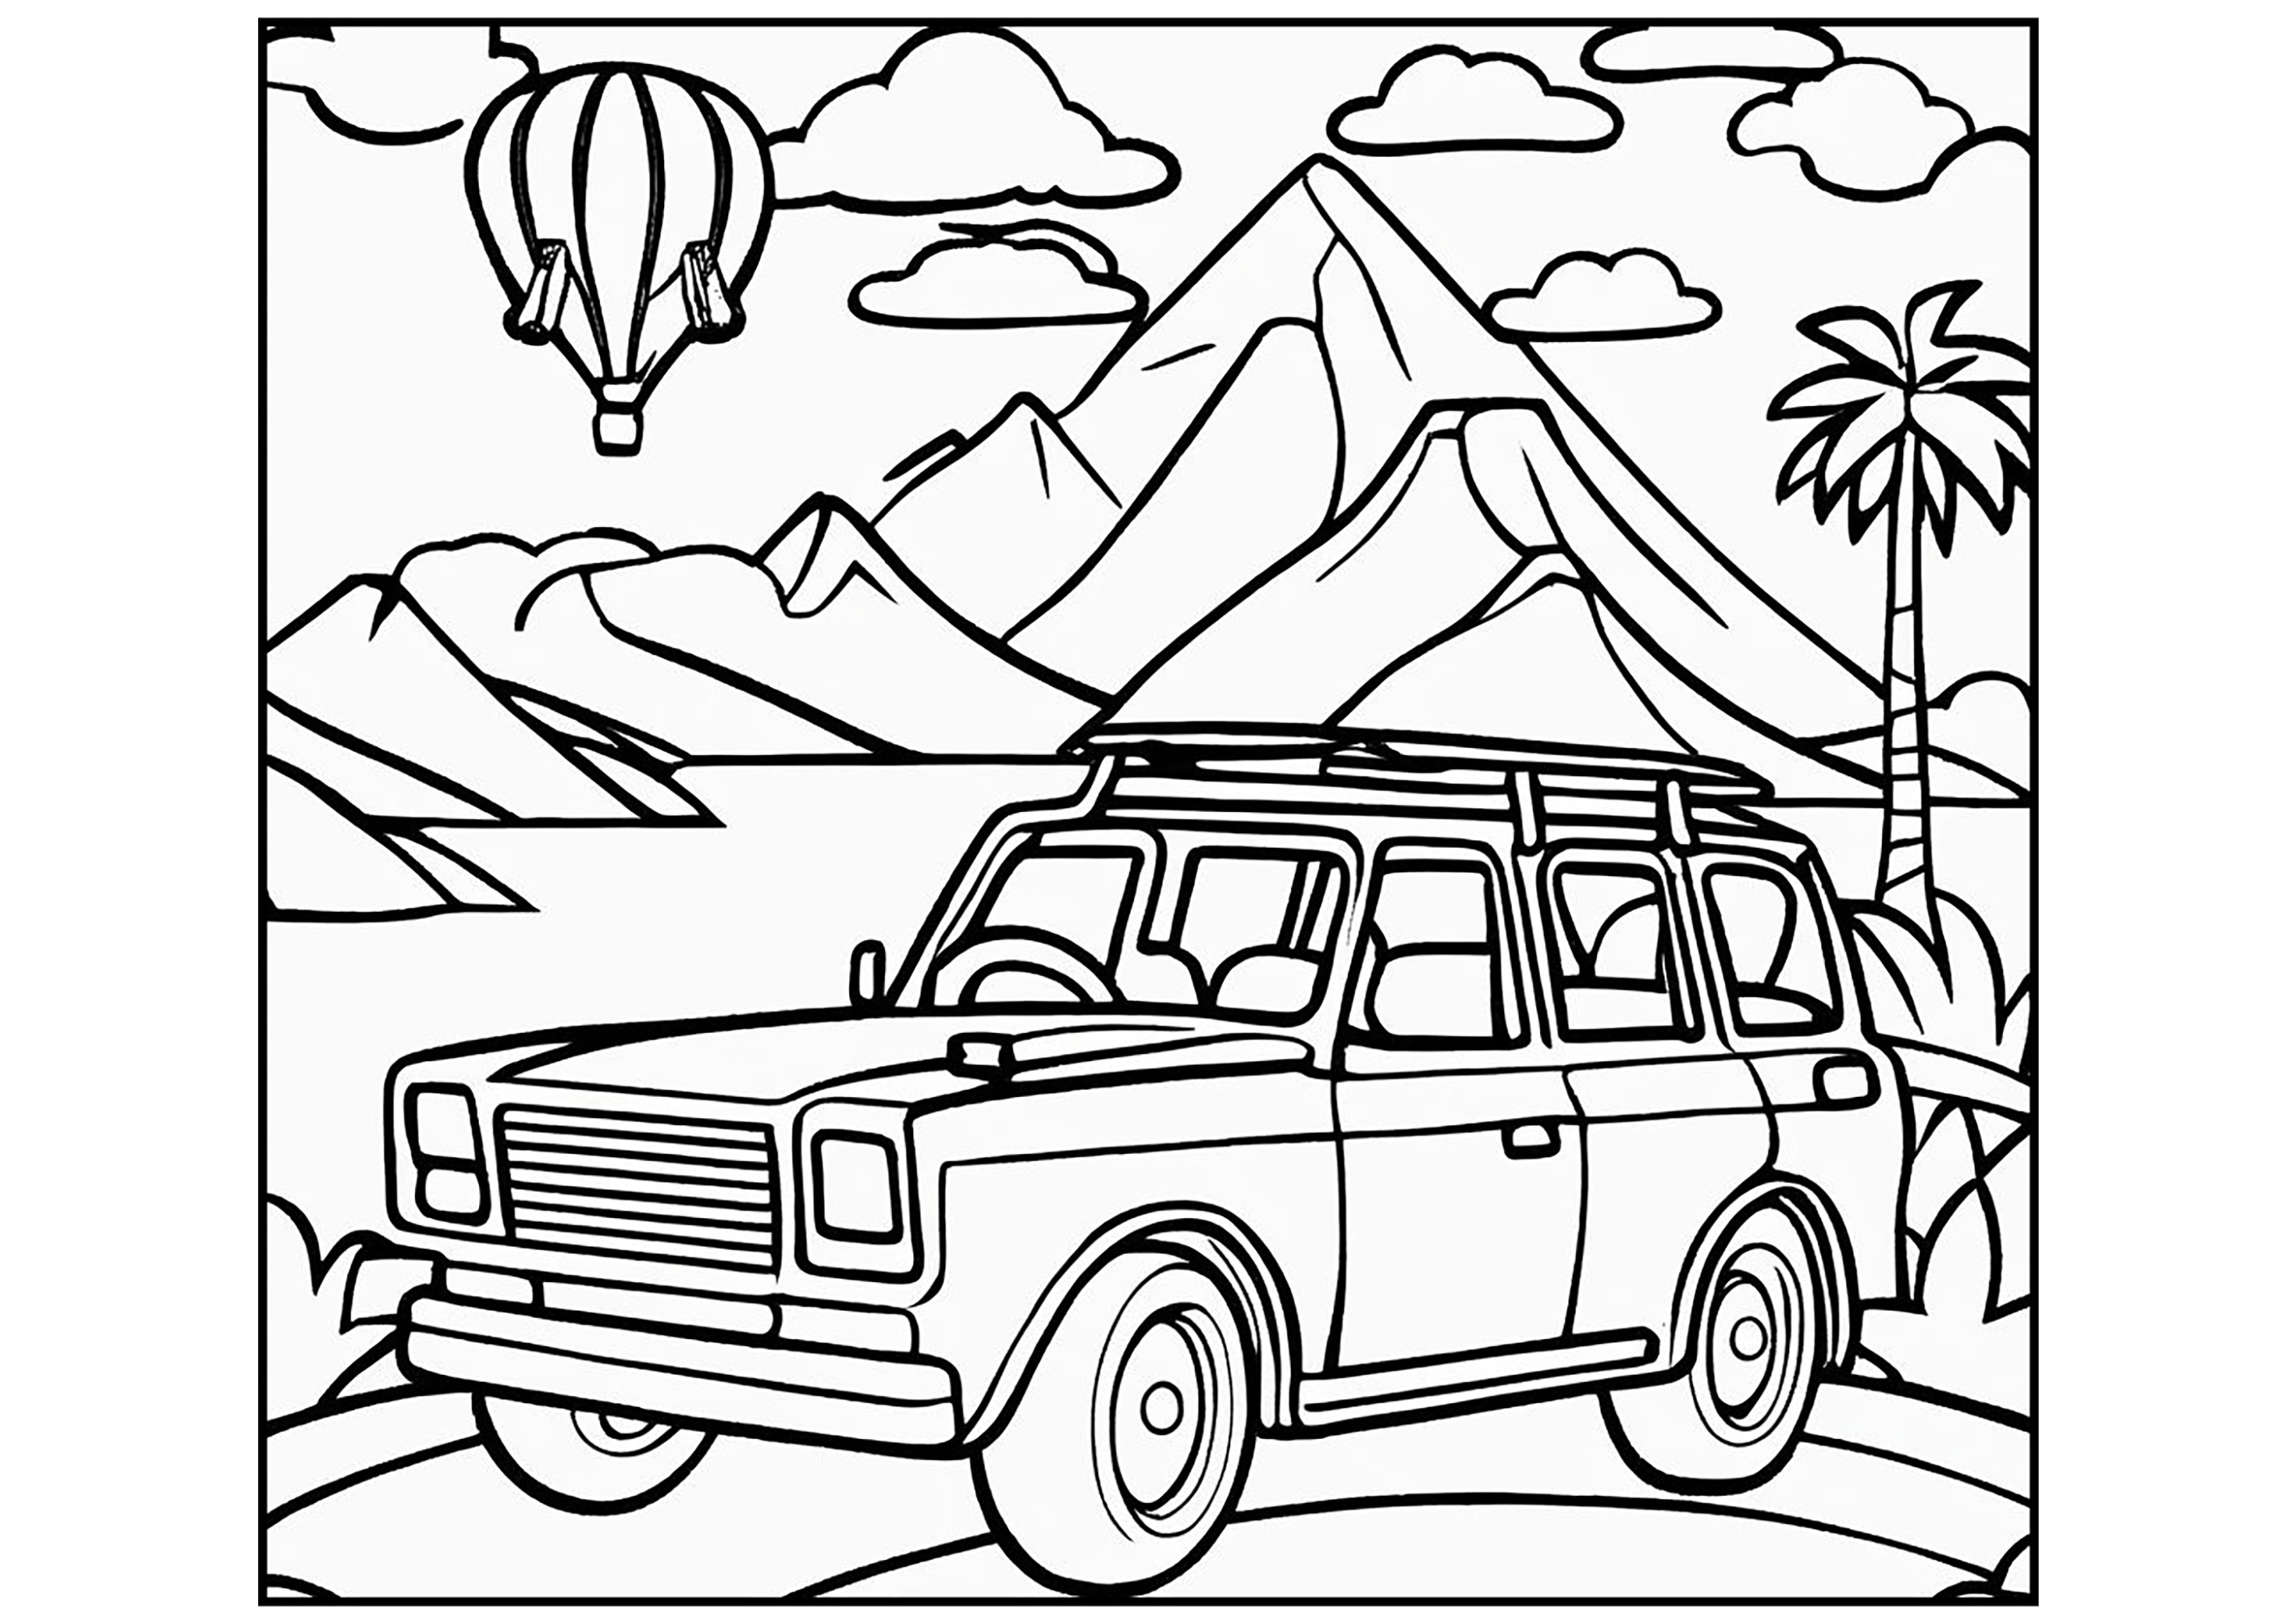 A Jeep with mountains and a hot-air balloon in the background